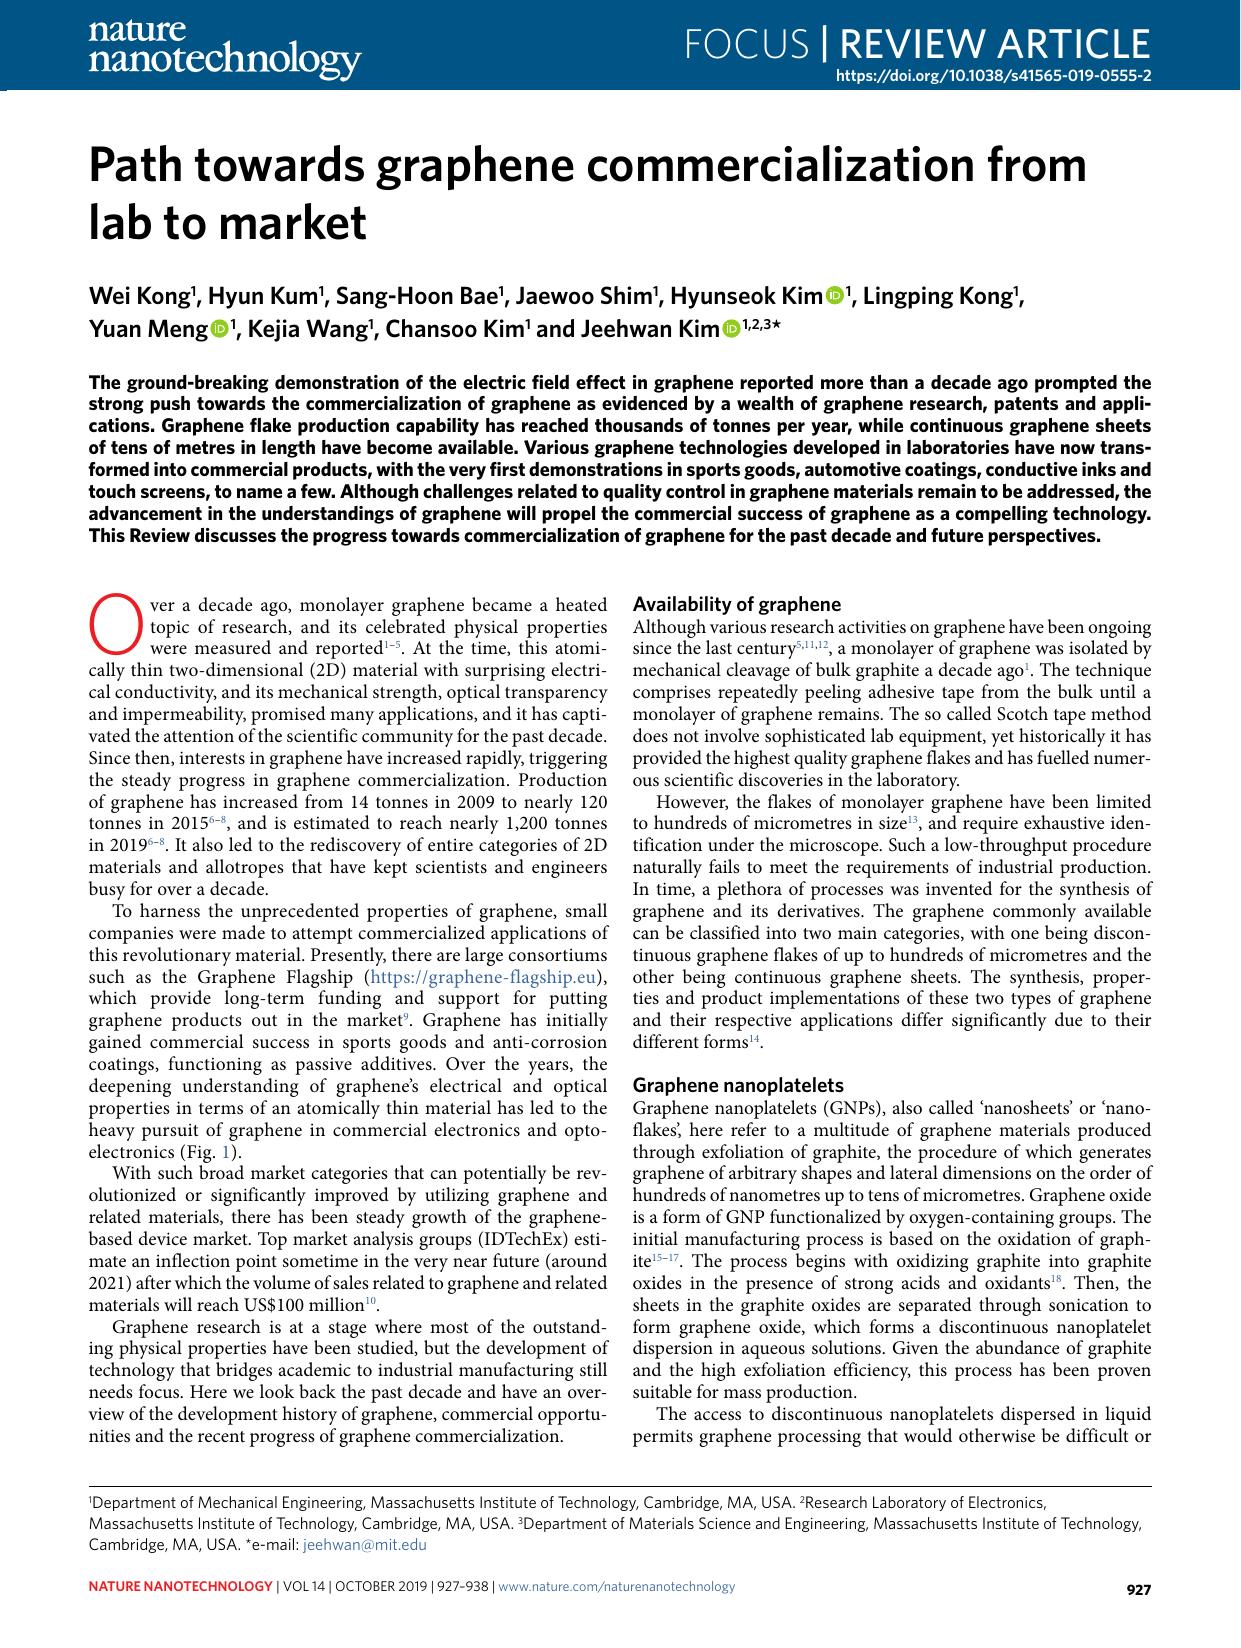 Path towards graphene commercialization from lab to market by unknow